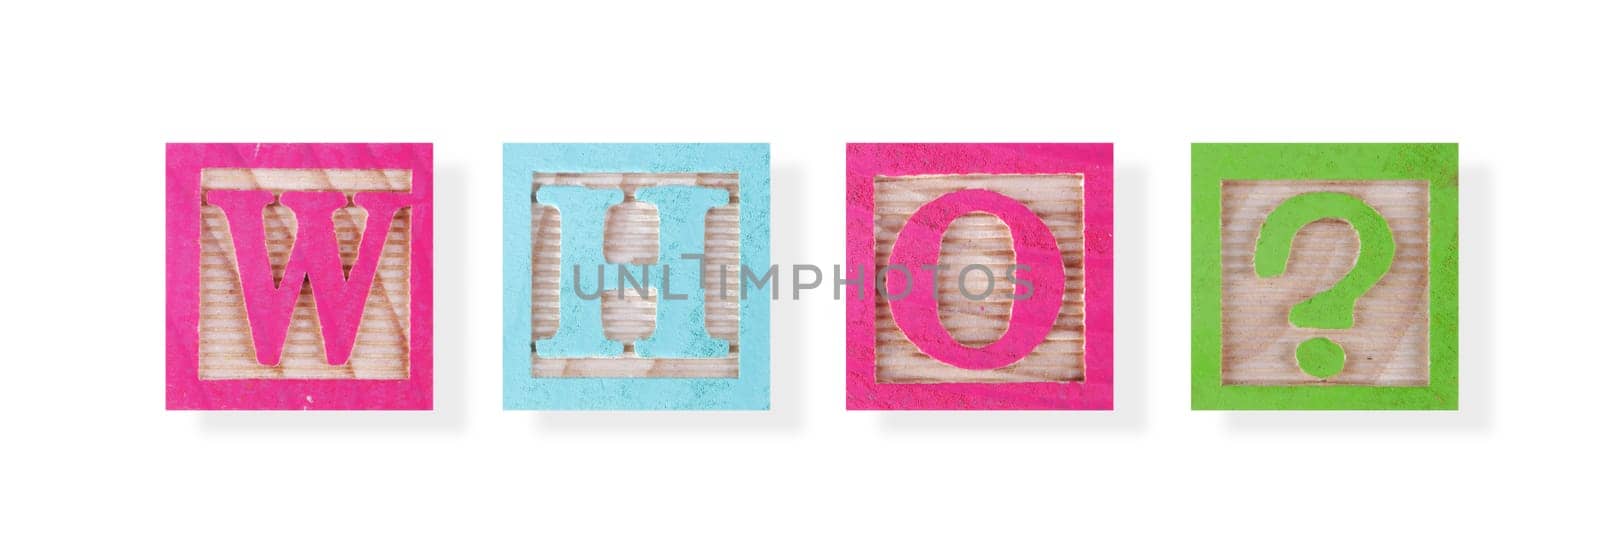 A Who concept with childs wood blocks on white with clipping path to remove shadow